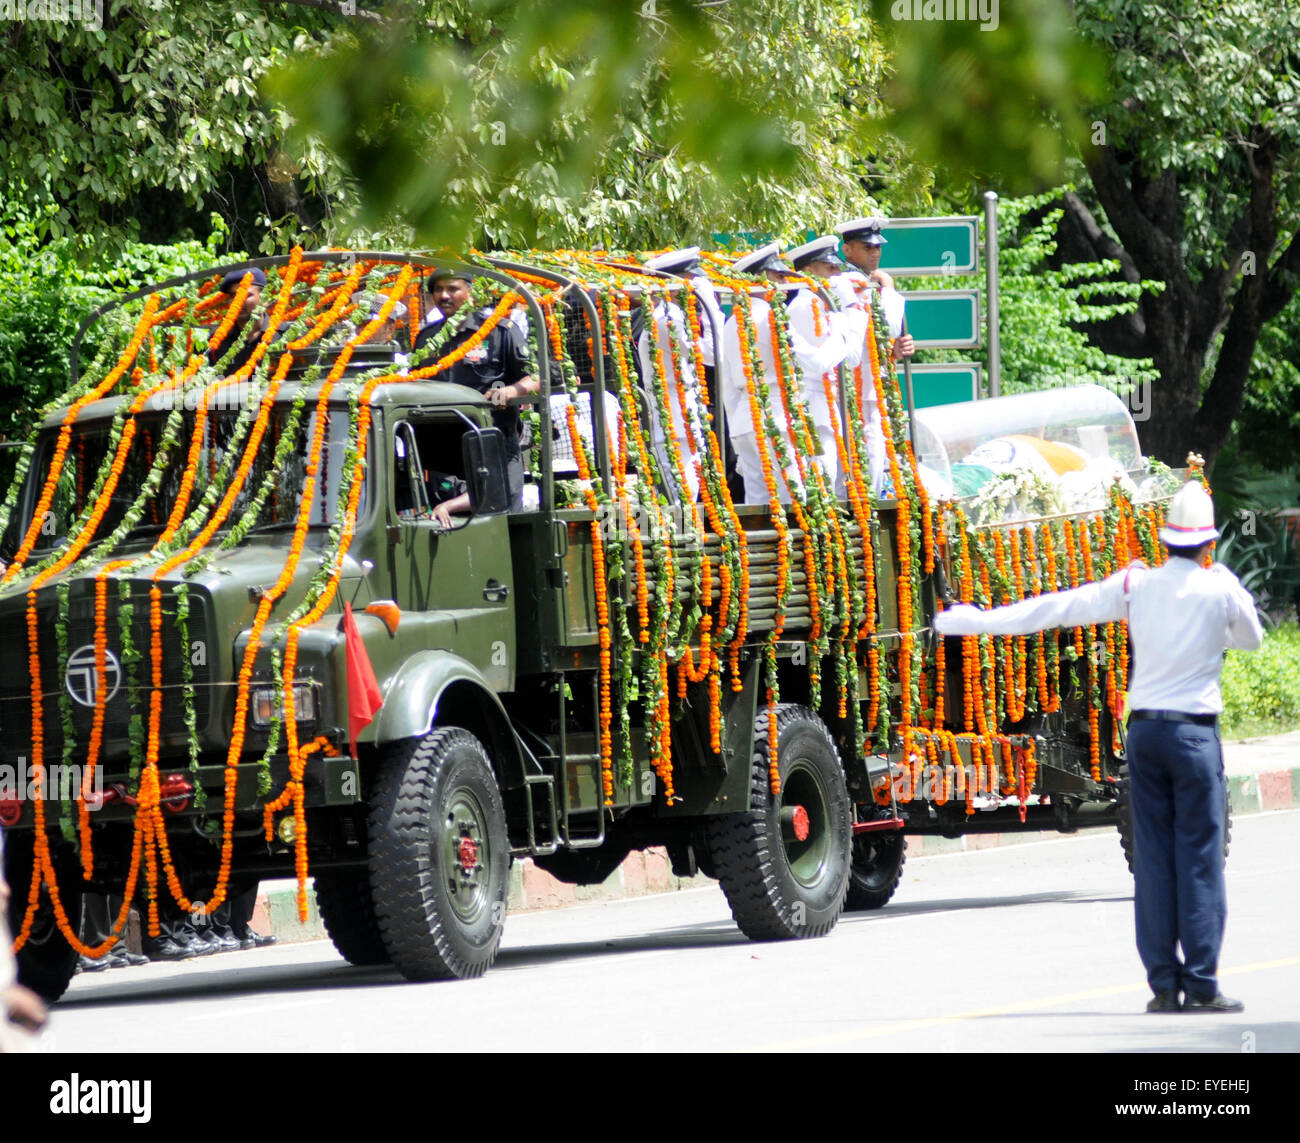 New Delhi, India. 28th July, 2015. The body of former Indian president A.P.J. Abdul Kalam is transported to reach his official house in New Delhi. Kalam was the state president in the year 2002-2007 and he died after suffering a cardiac arrest. © Wasim Sarvar/Pacific Press/Alamy Live News Stock Photo